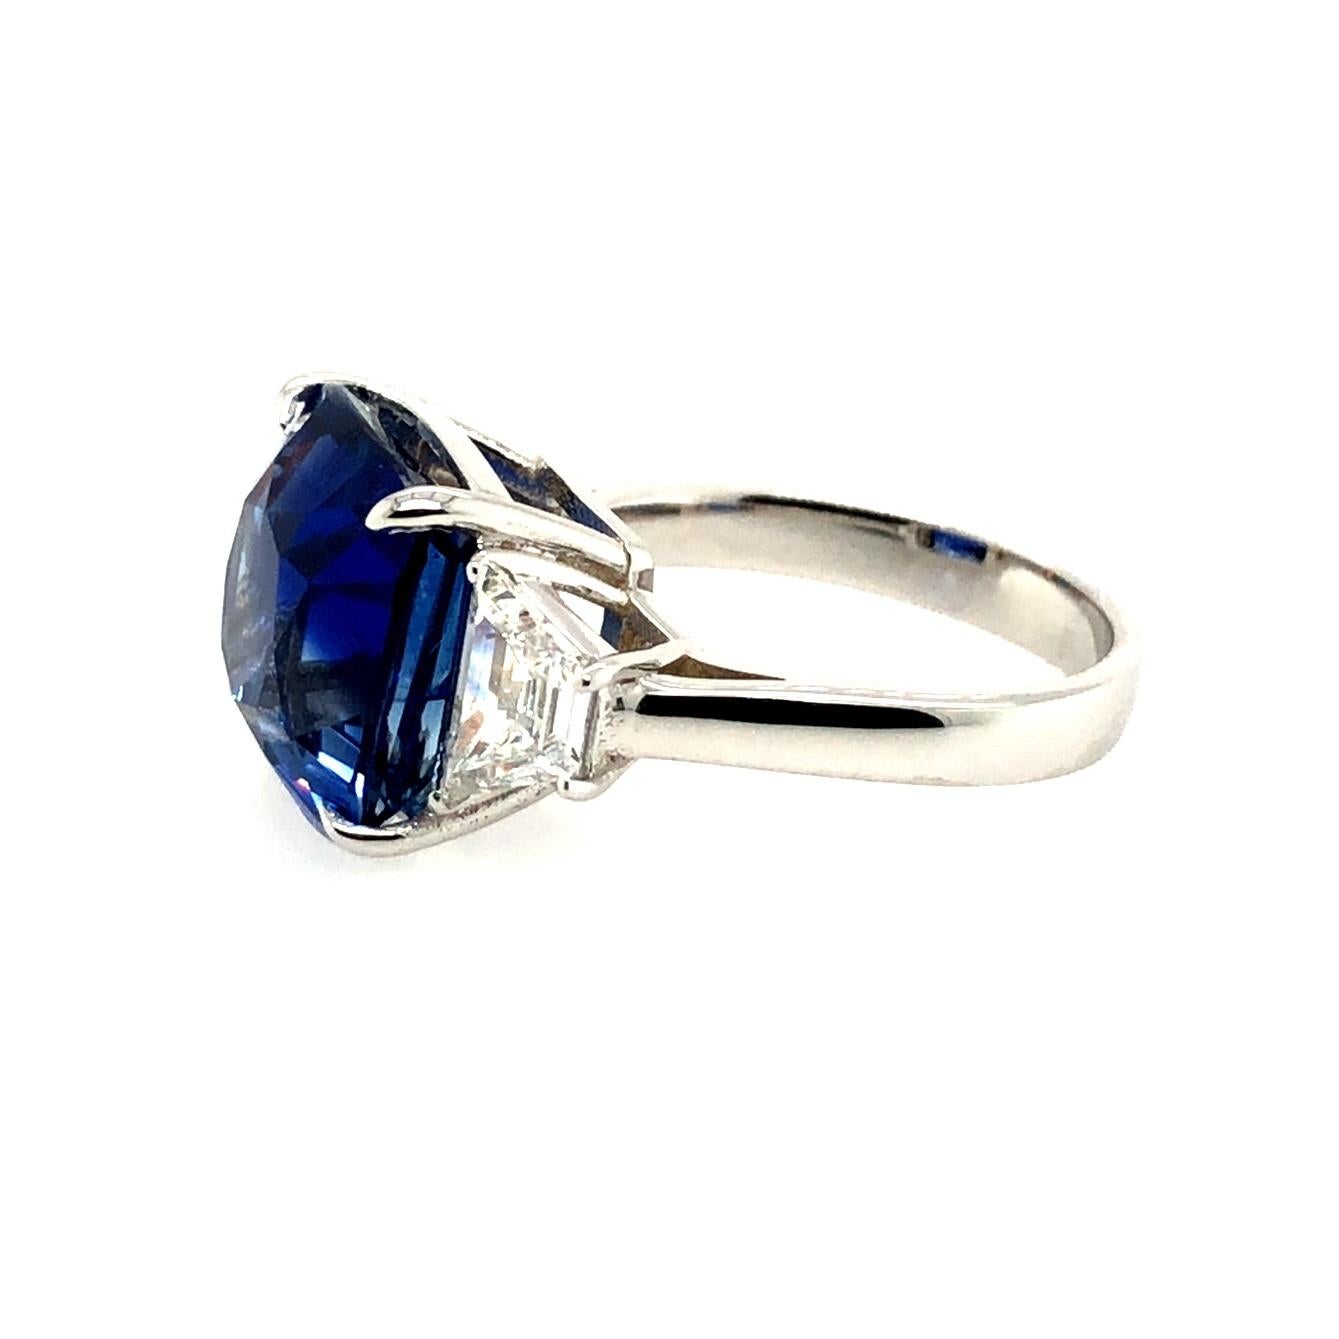 Offered here is an absolutely gorgeous 12.10 carat certified natural NO HEAT sapphire from Madagascar set in a white gold 18k ring with 2 trapezoid diamonds. The sapphire is a square cushion cut with a vivid blue color and measures 12.09 x 11.99